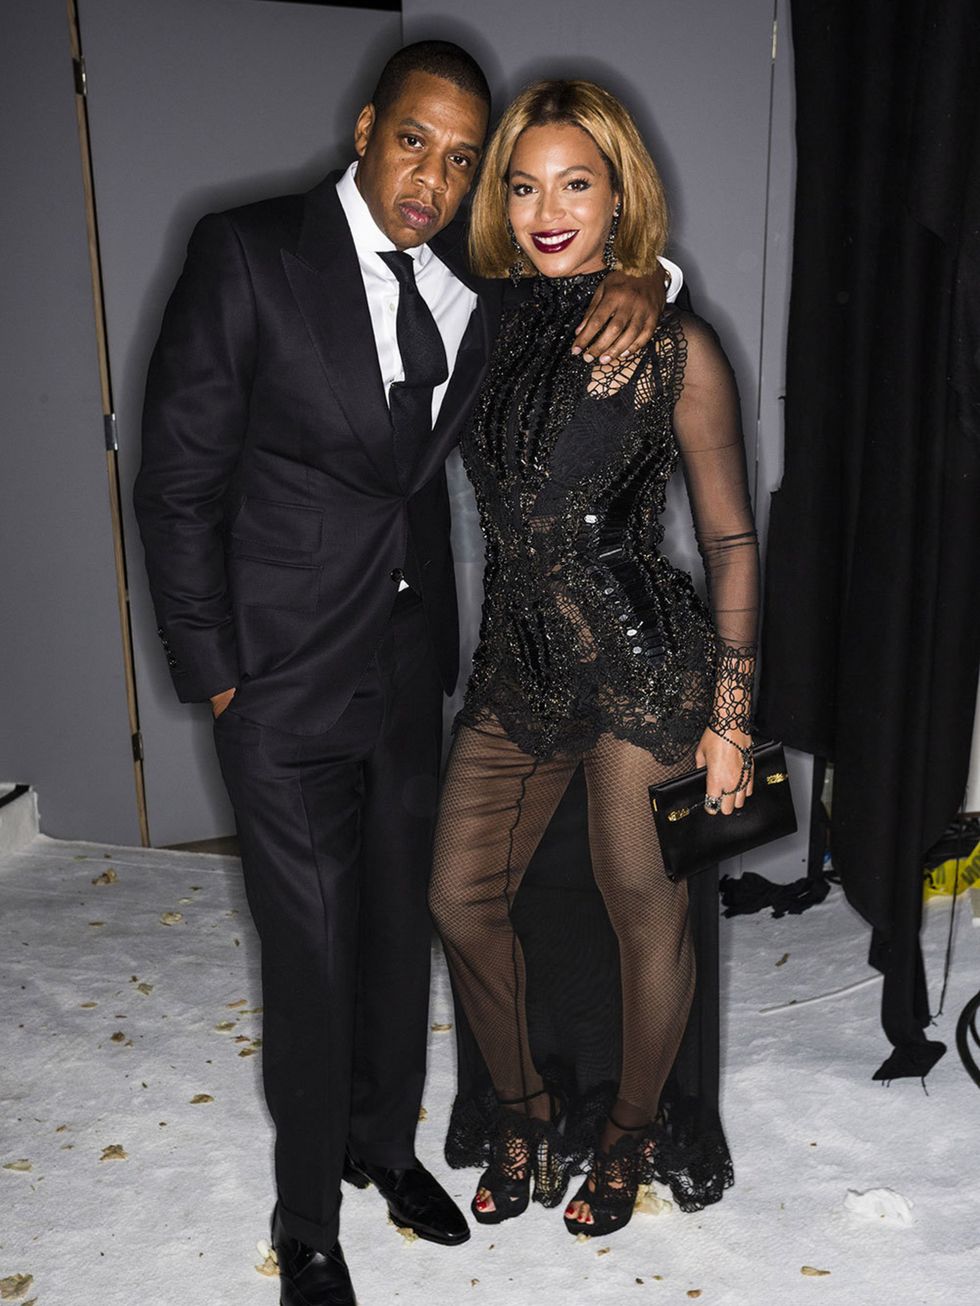 Jay-Z and Beyonce attend the Tom Ford a/w 2015 after party in Los Angeles.